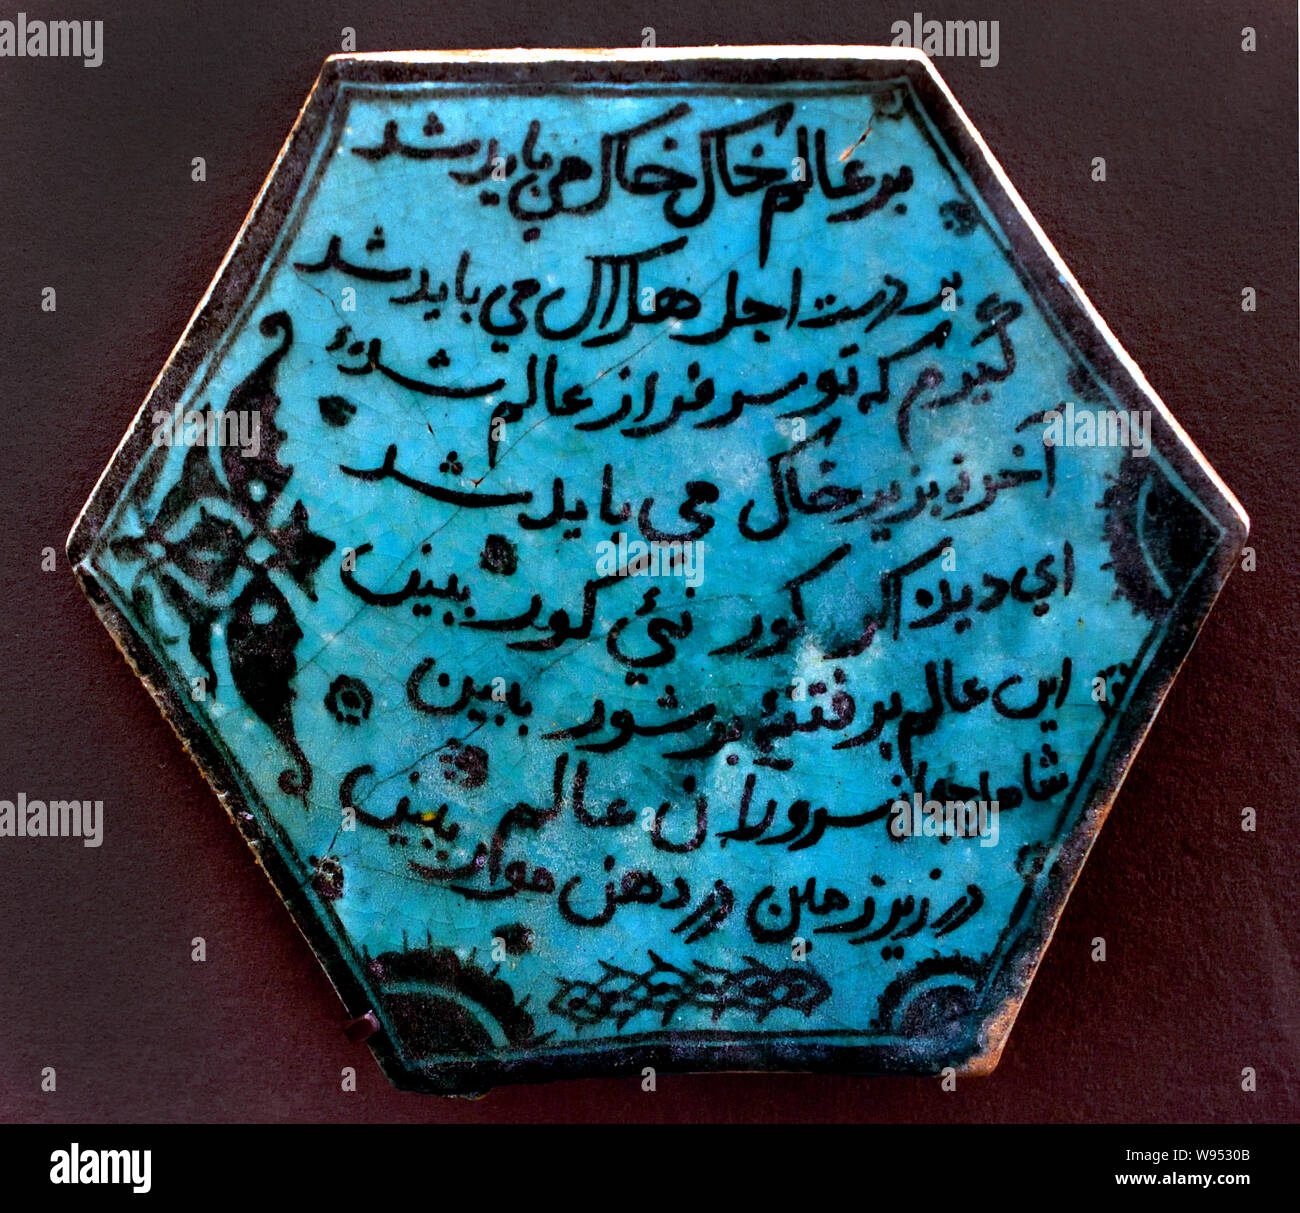 Funeral registration arreau 15th century Iran Ceramic, painted underglaze decoration  The inscription in Persian, in simple Naskh script, says: 'On the dust universe, you have to become dust. By the hand of death, you must perish, you who were the honor of the world. In the end, no; you have to go underground. O my eye, if you are blind, look at the light of the tomb. This world full of troubles and bitterness, look at it. The kings of the world, the rulers of the universe. Look at them underground, in the mouth of Death. Stock Photo